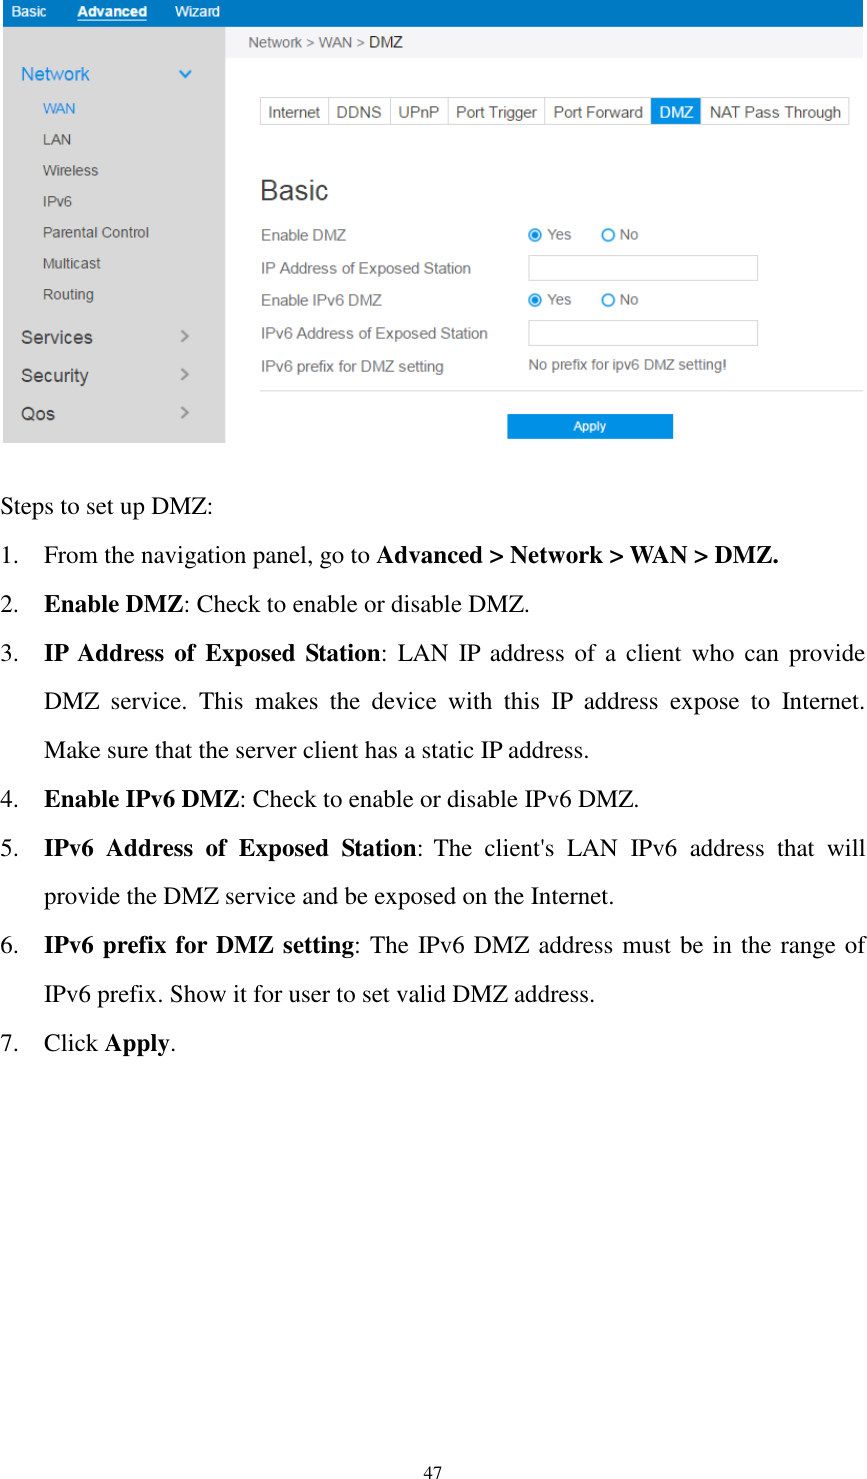  47   Steps to set up DMZ:   1. From the navigation panel, go to Advanced &gt; Network &gt; WAN &gt; DMZ. 2. Enable DMZ: Check to enable or disable DMZ. 3. IP Address of  Exposed Station:  LAN IP  address of a  client  who  can provide     DMZ  service.  This  makes  the  device  with  this  IP  address  expose  to  Internet. Make sure that the server client has a static IP address. 4. Enable IPv6 DMZ: Check to enable or disable IPv6 DMZ. 5. IPv6  Address  of  Exposed  Station: The  client&apos;s  LAN  IPv6  address  that  will provide the DMZ service and be exposed on the Internet. 6. IPv6 prefix for DMZ setting: The IPv6 DMZ address must be in the range of IPv6 prefix. Show it for user to set valid DMZ address. 7. Click Apply.  